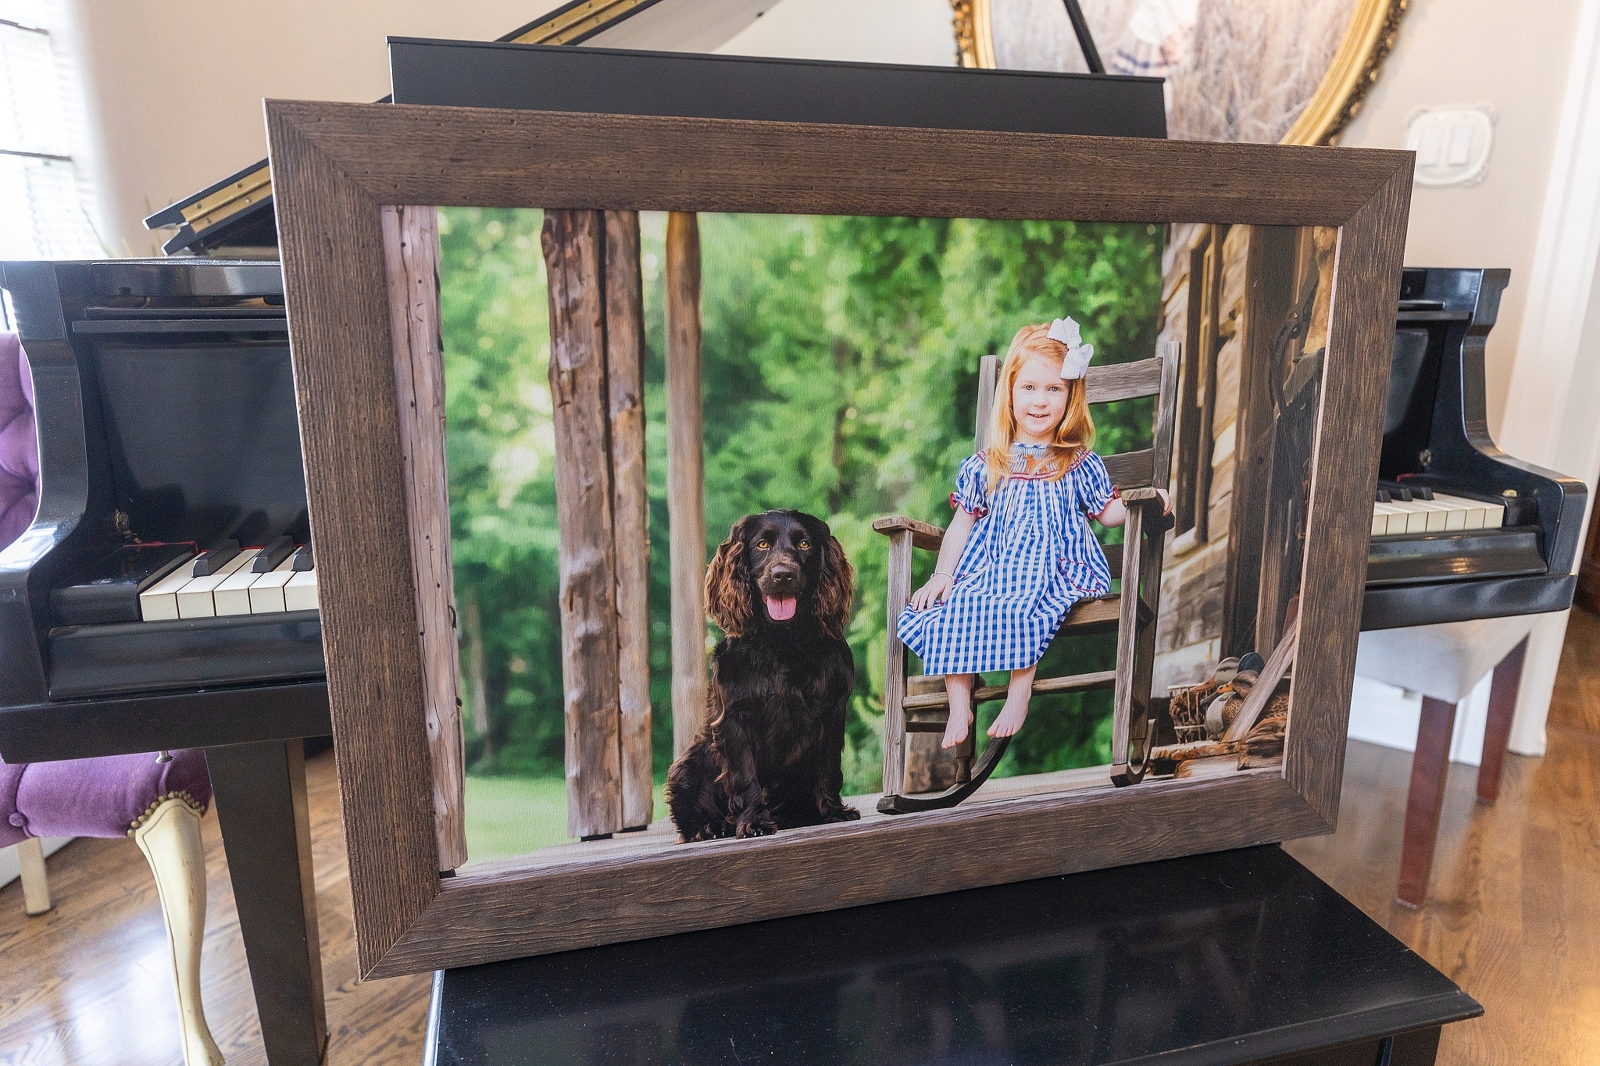 A framed photograph of a smiling young girl and a black dog sitting together, displayed on a piano.